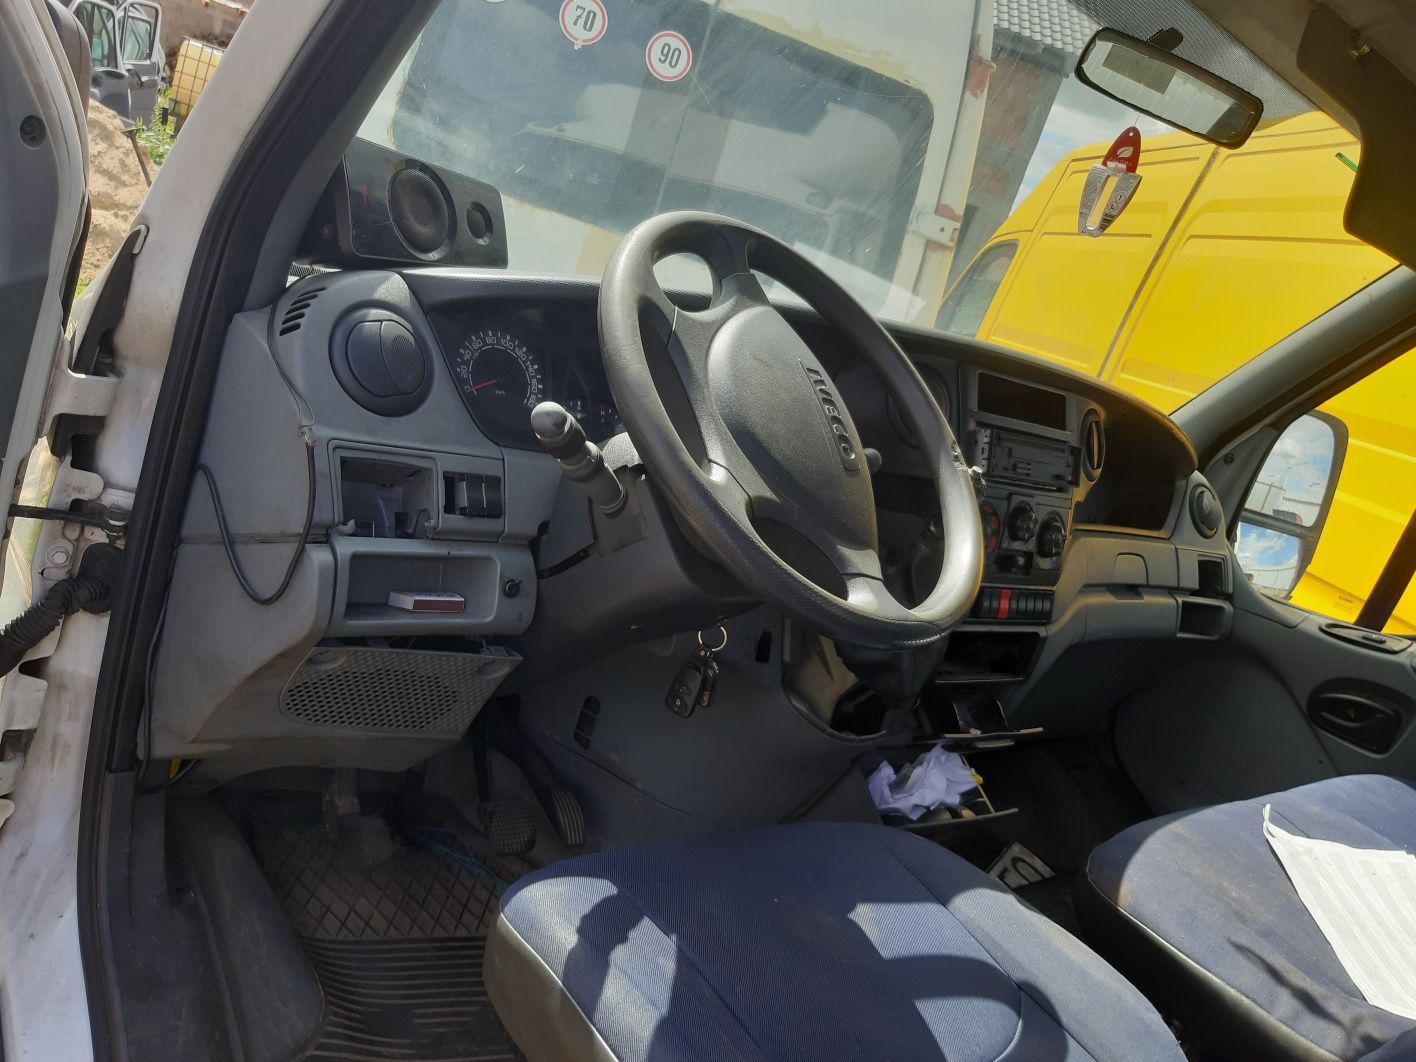 Motor iveco daily 2.3  euro 4